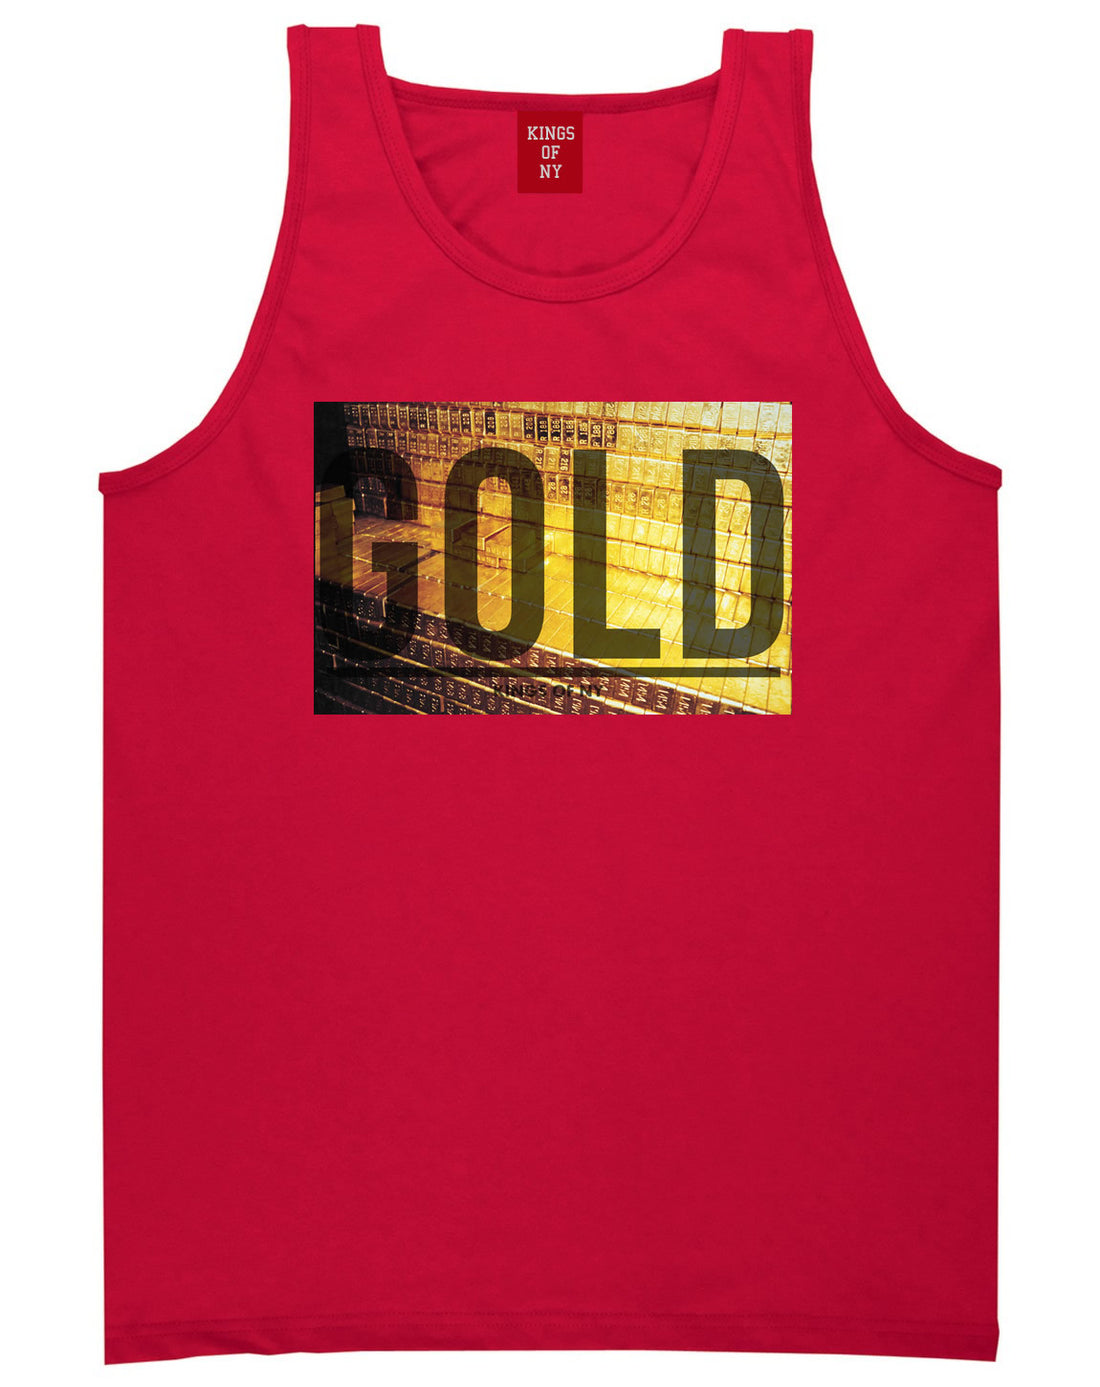 Gold Bricks Money Luxury Bank Cash Tank Top In Red by Kings Of NY